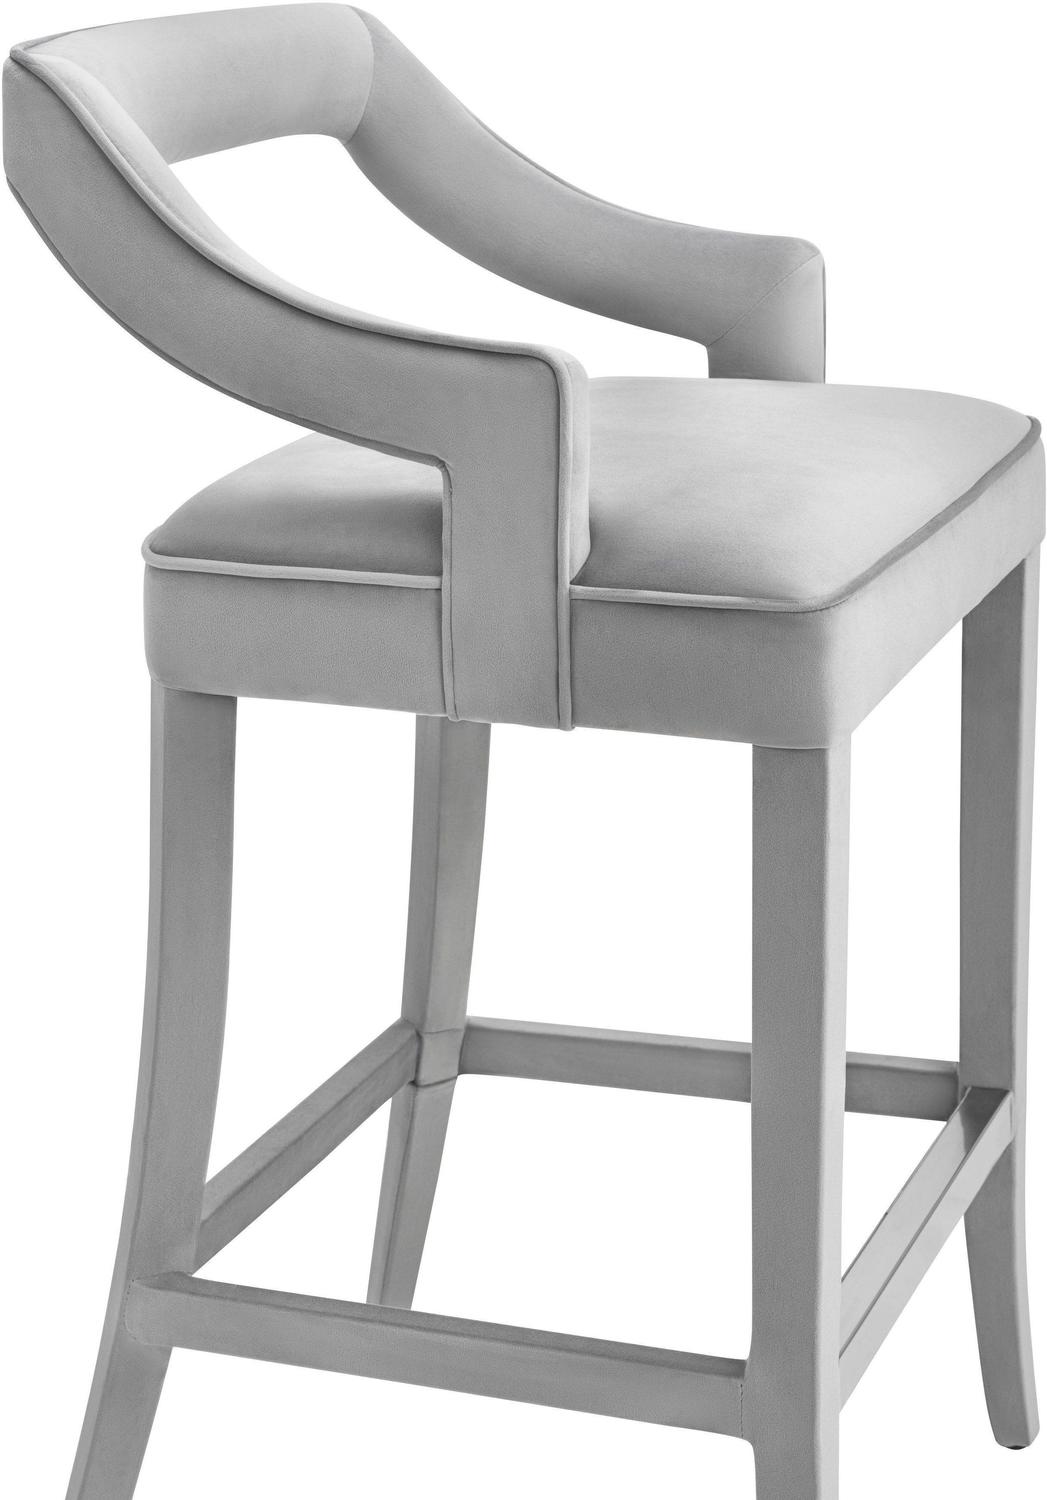 set of 4 bar stools with backs Contemporary Design Furniture Stools Bar Chairs and Stools Grey